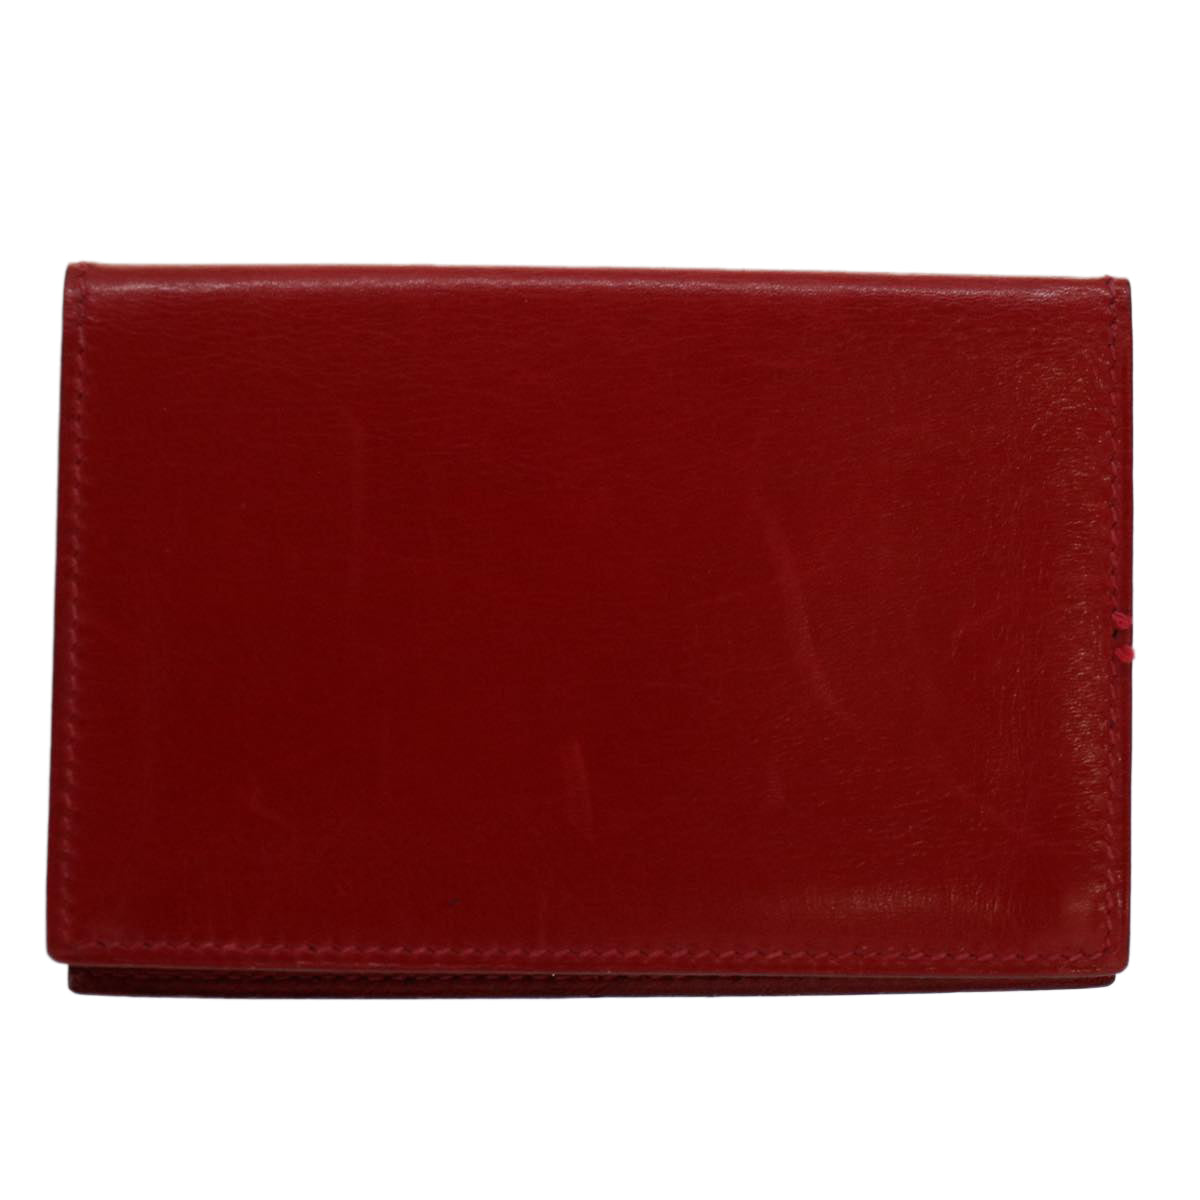 HERMES Card Case Leather Red Auth 50858 - 0